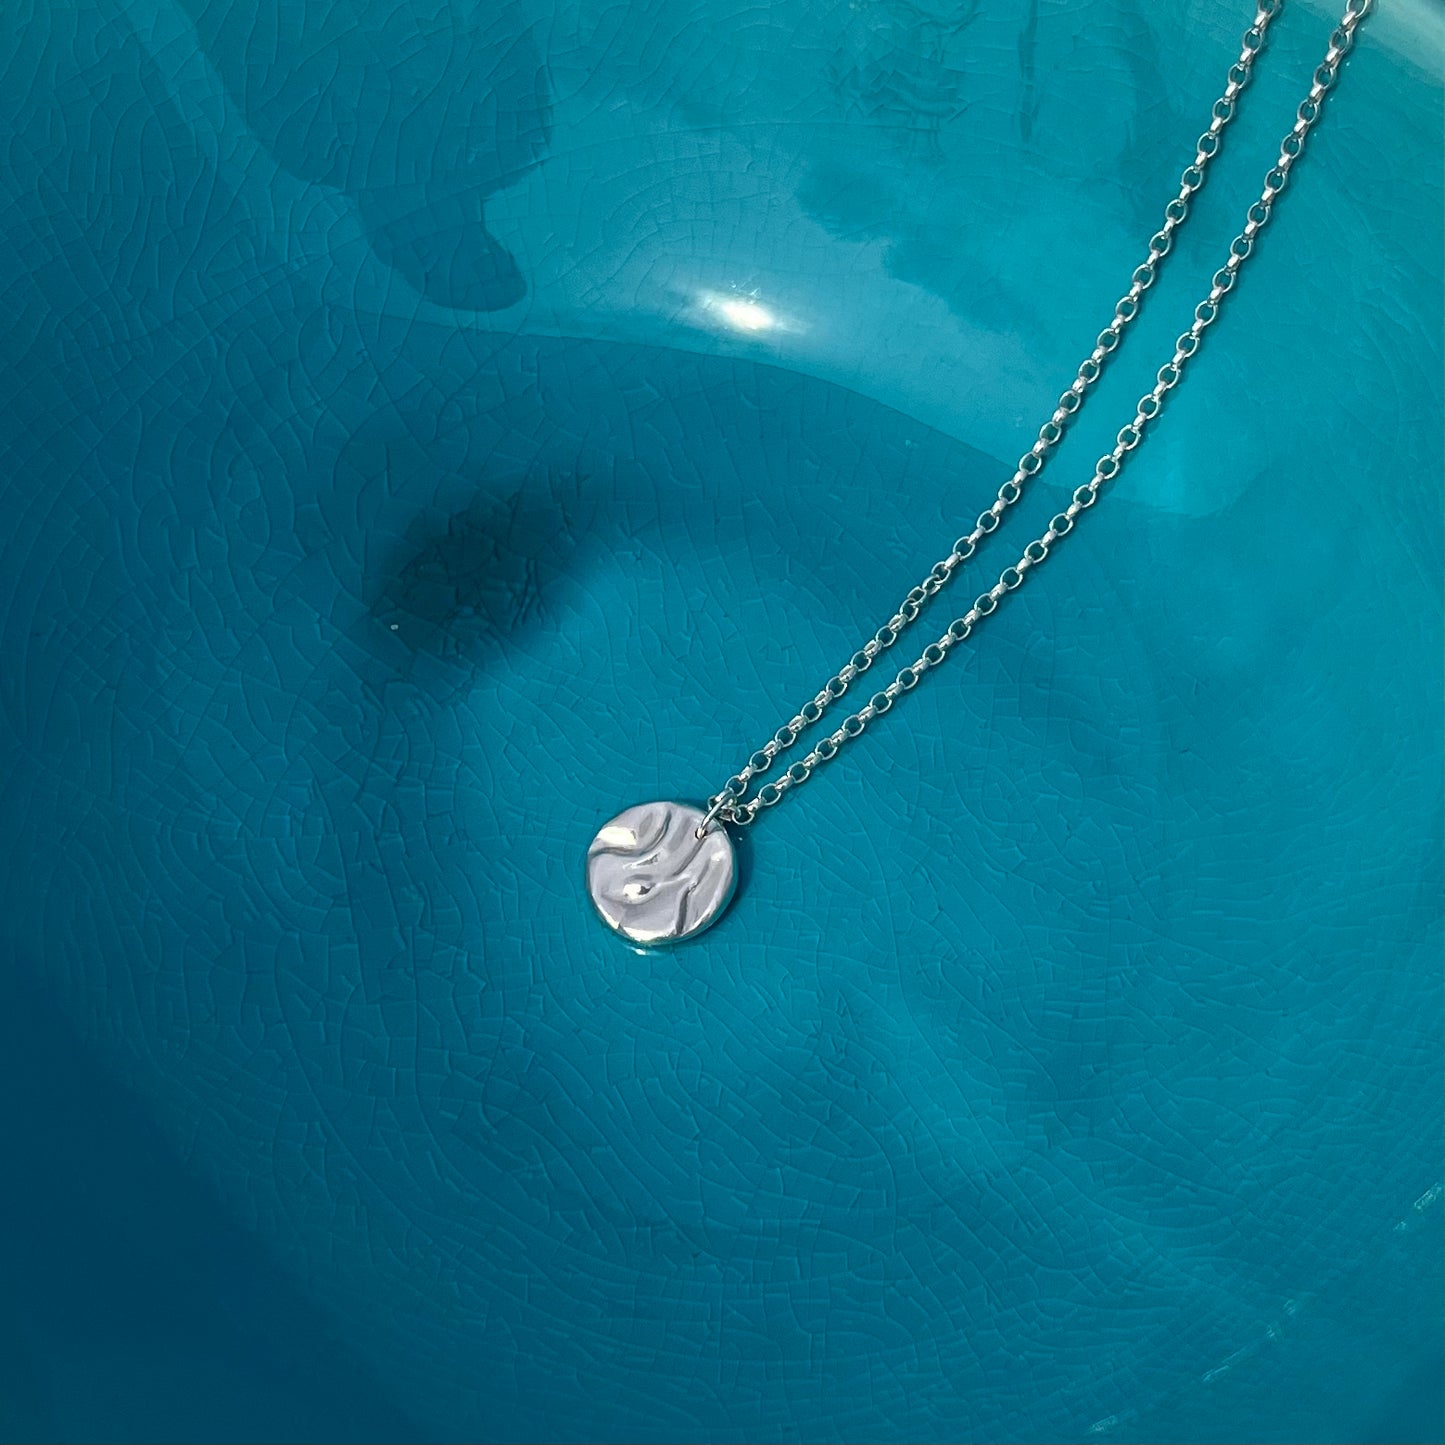 A sterling silver rock pool pendant and chain on an azure background.